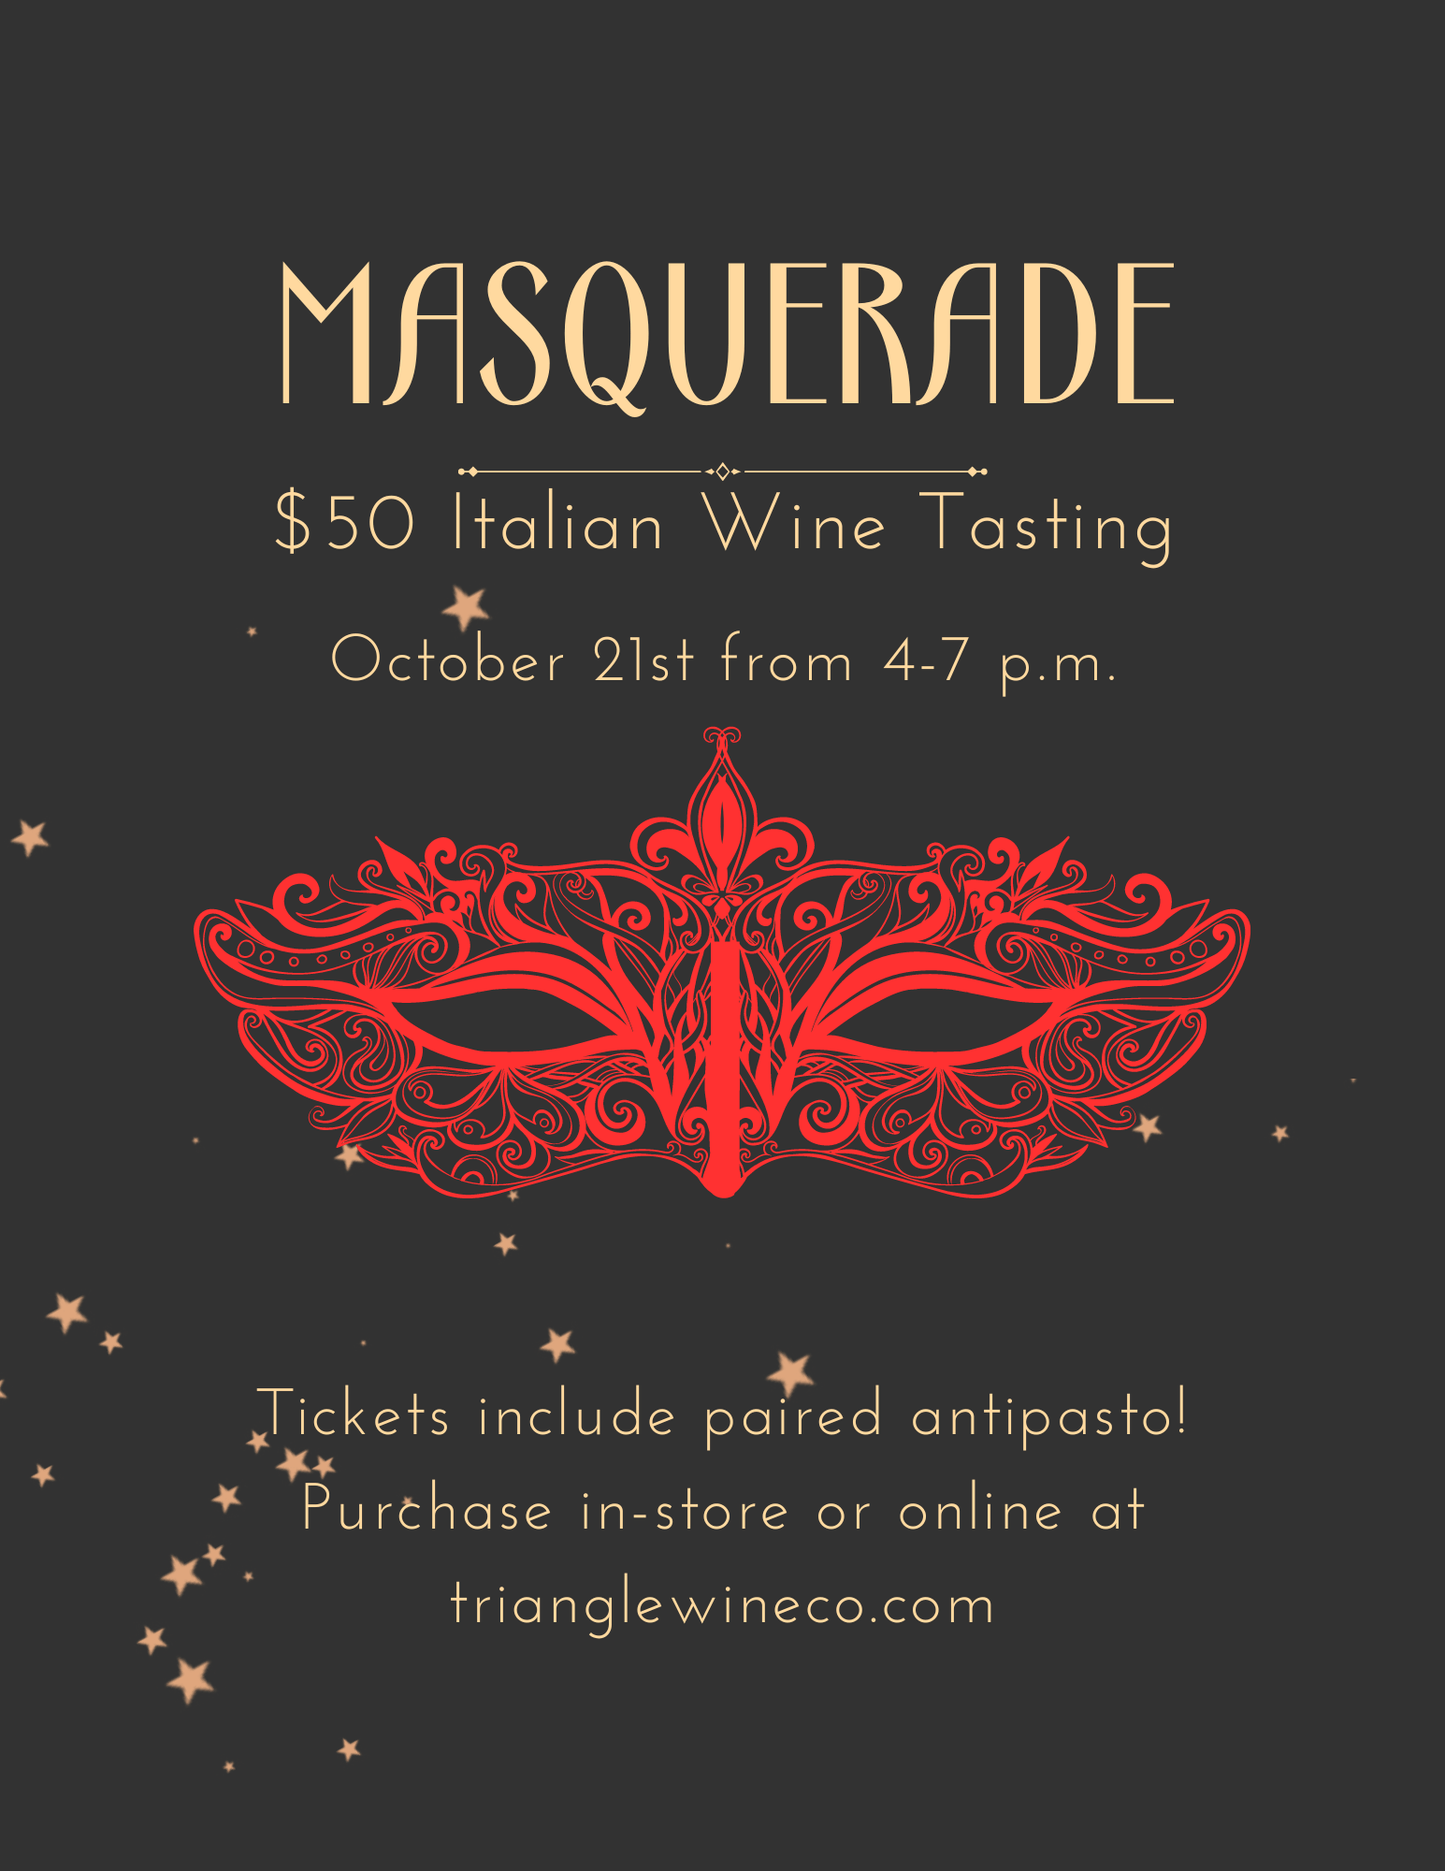 Event Tickets (10/21/23) $50 Italian Wine Tasting and Masquerade Event-Cary